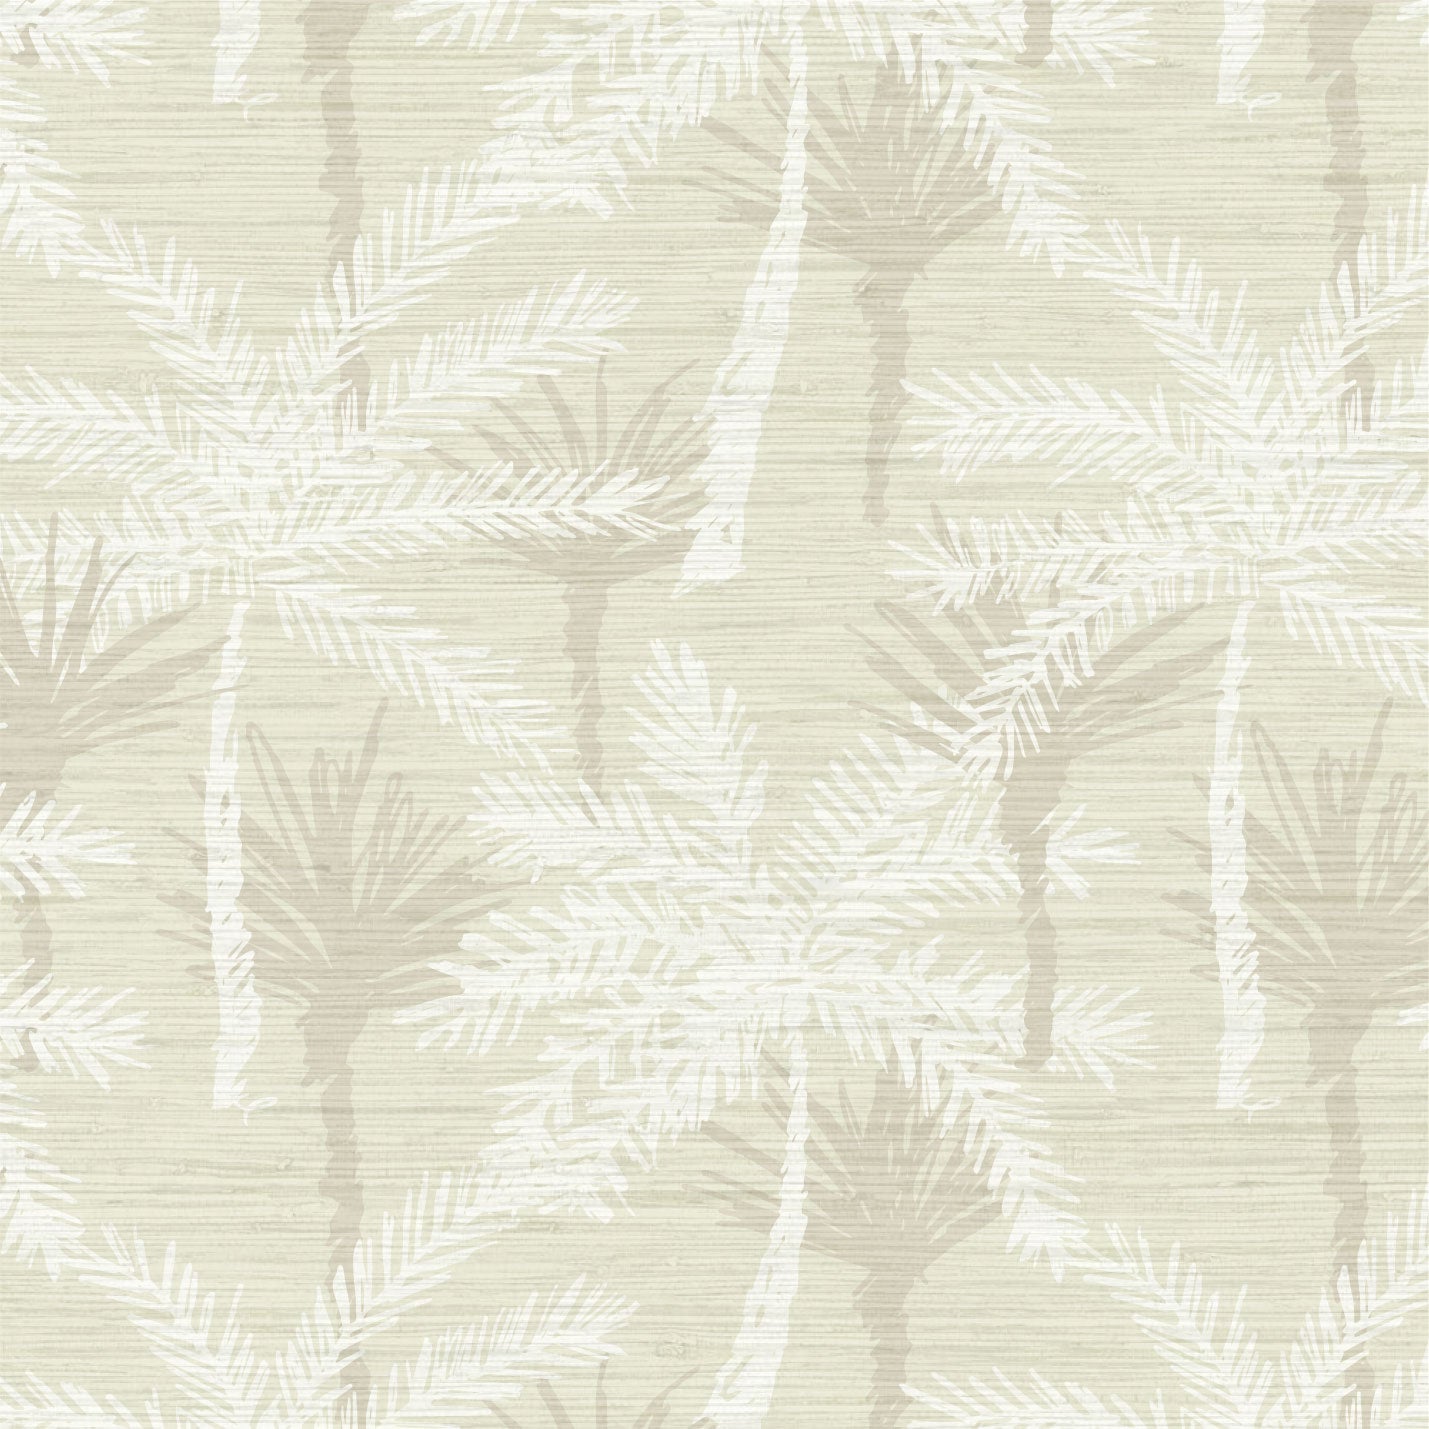 Grasscloth wallpaper Natural Textured Eco-Friendly Non-toxic High-quality  Sustainable Interior Design Bold Custom Tailor-made Retro chic Tropical Jungle Coastal Garden Seaside Coastal Seashore Waterfront Vacation home styling Retreat Relaxed beach vibes Beach cottage Shoreline Oceanfront nature palm tree palms tonal cream sand off-white tan beige taupe